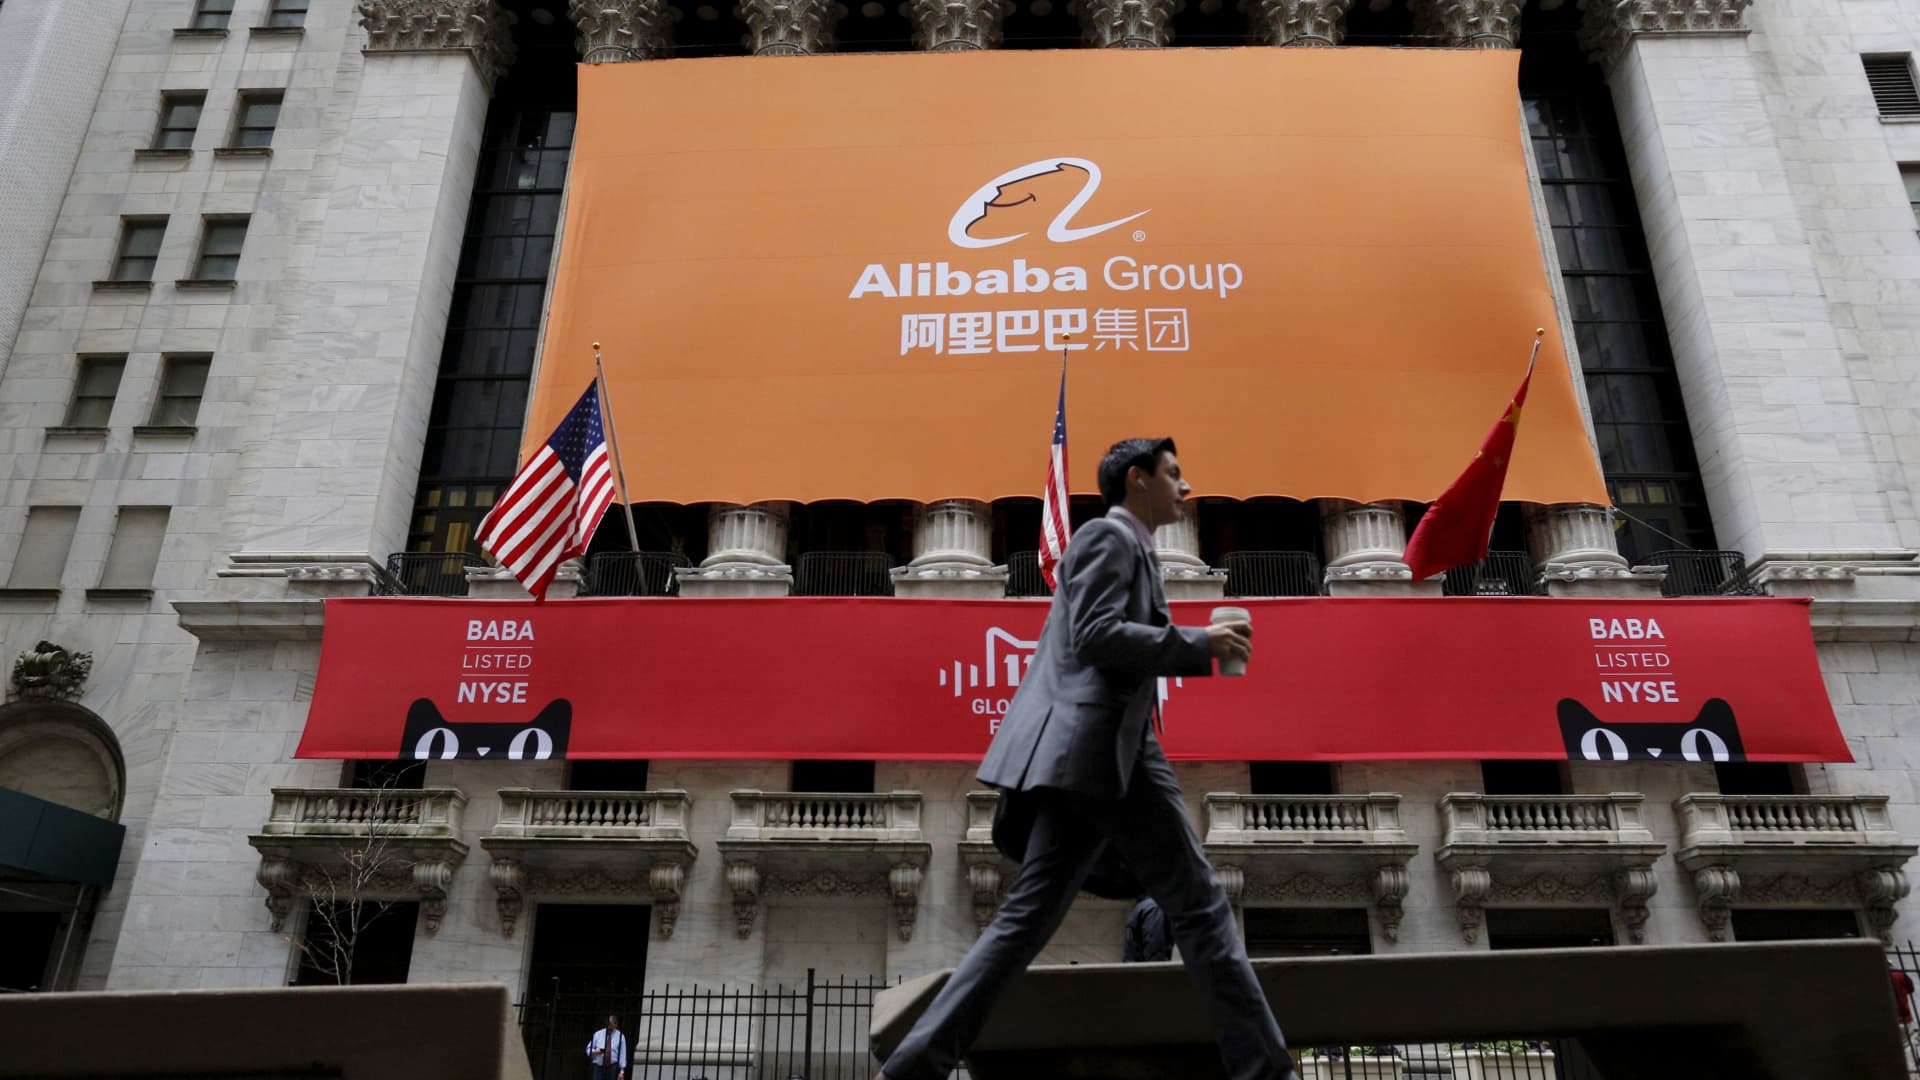 Jack Ma is praising Alibaba. Wall Street is more cautious [Video]